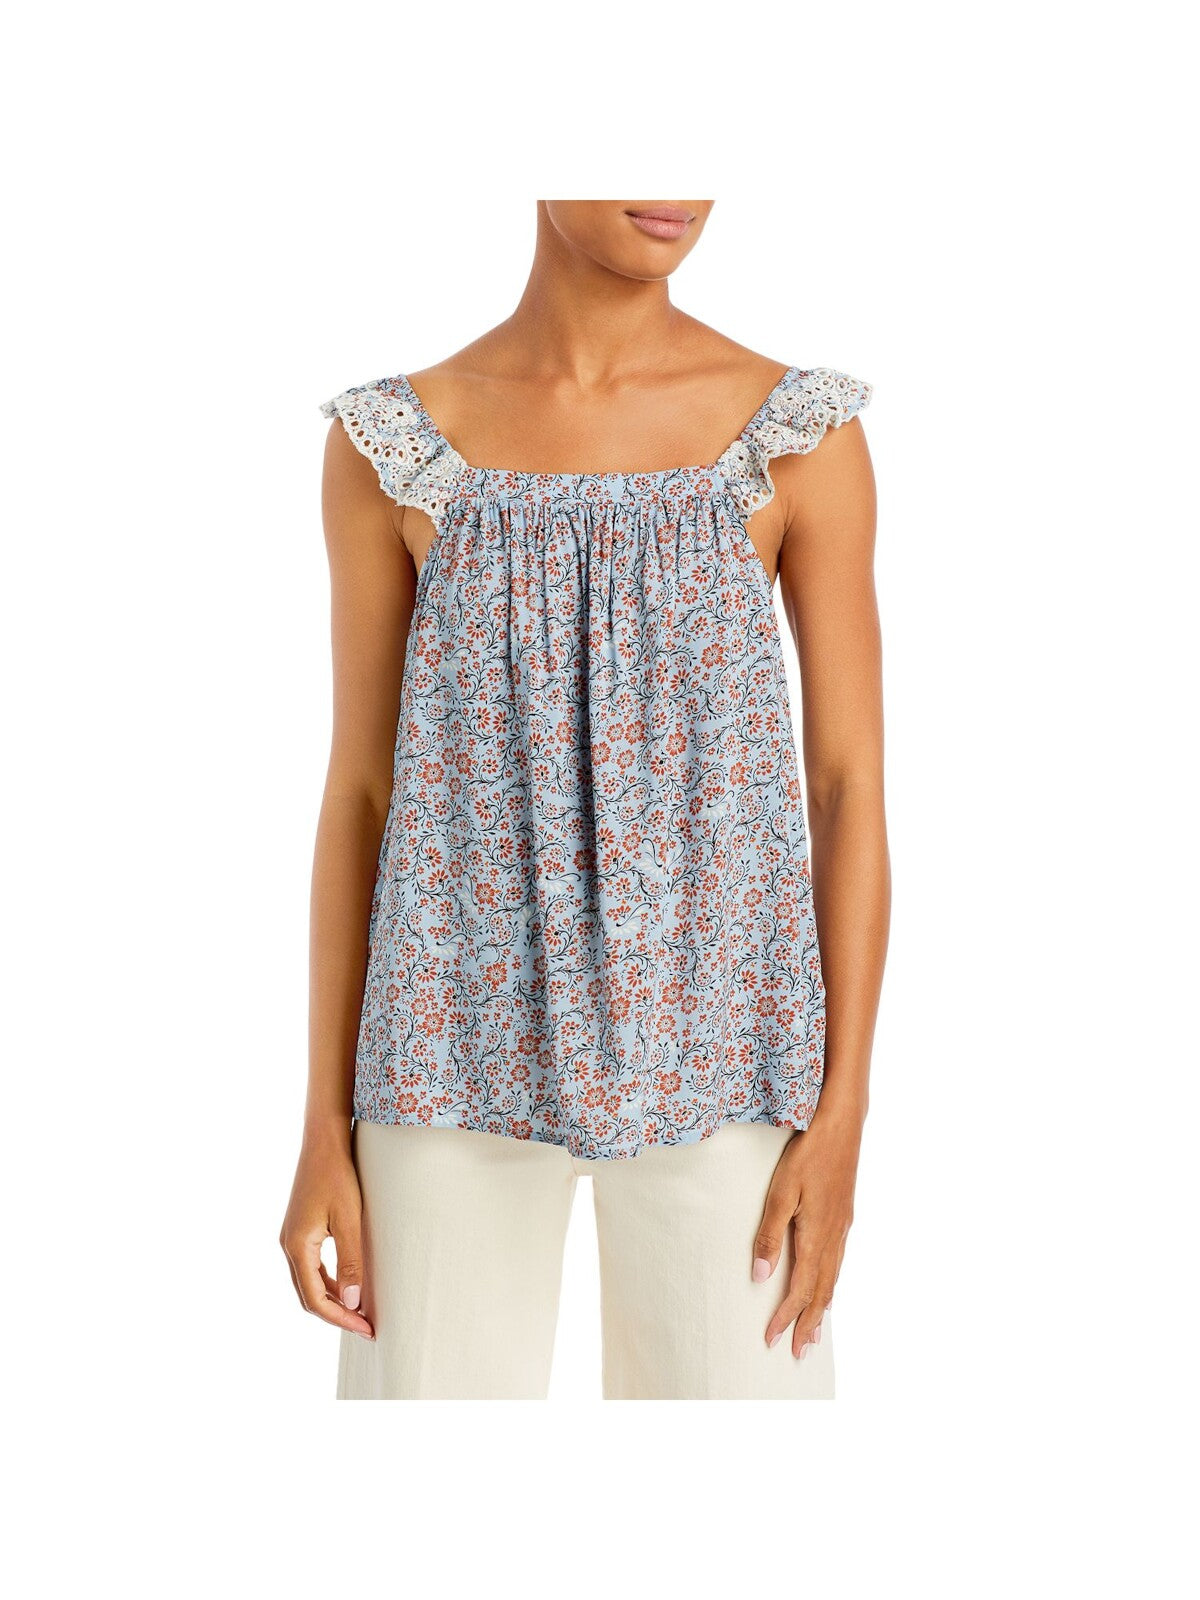 FEVER Womens Blue Embroidered Ruffled Pleated Floral Sleeveless Square Neck Tank Top XL